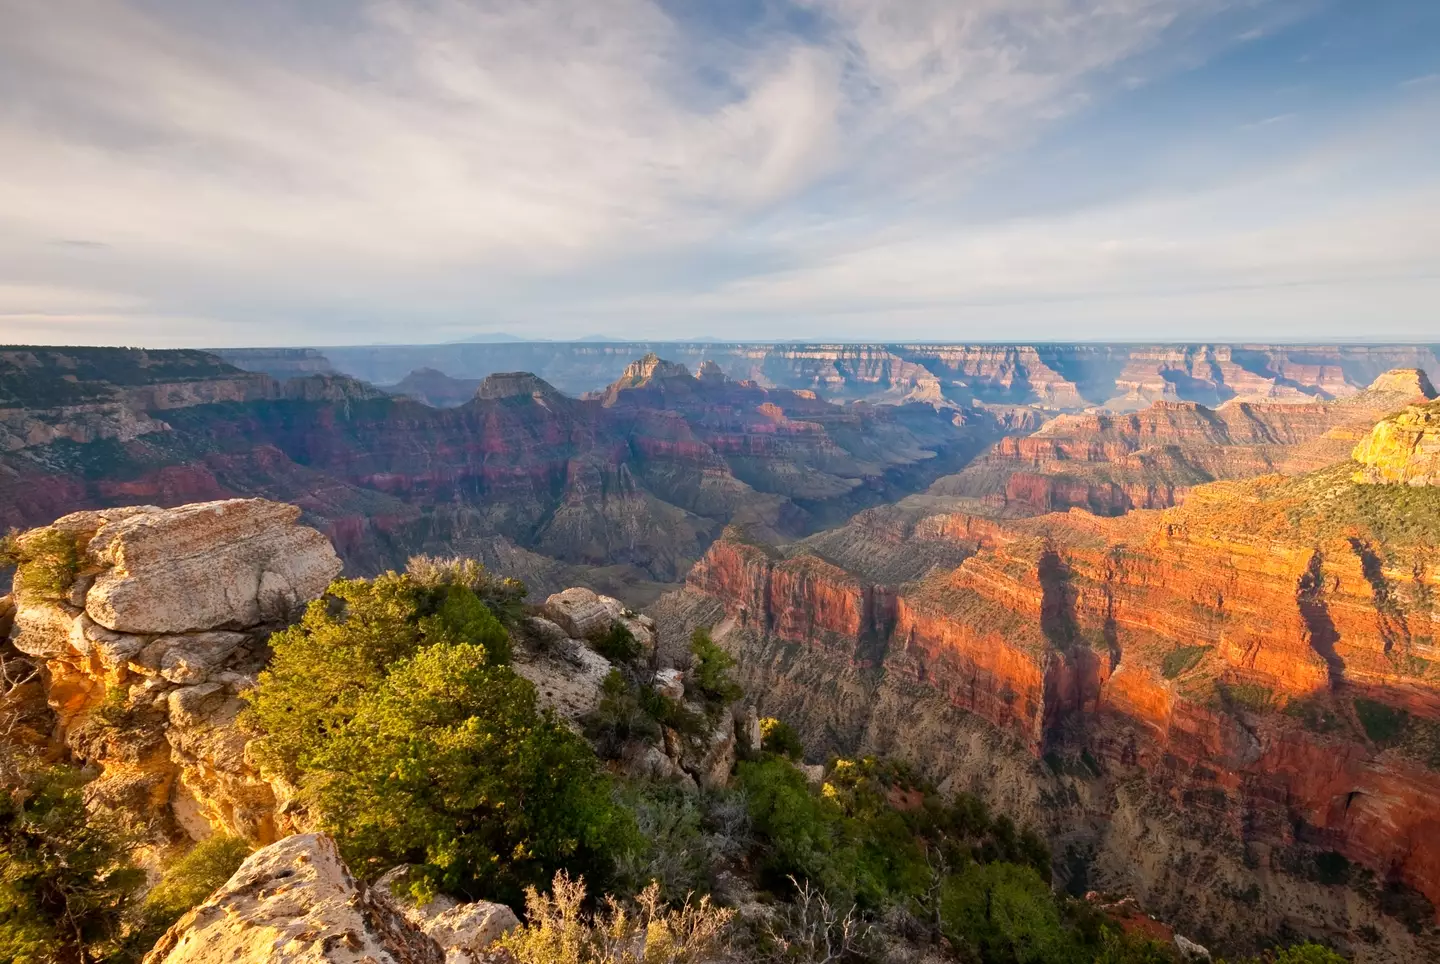 View from Bright Angel Point on the North Rim of Grand Canyon National Park.